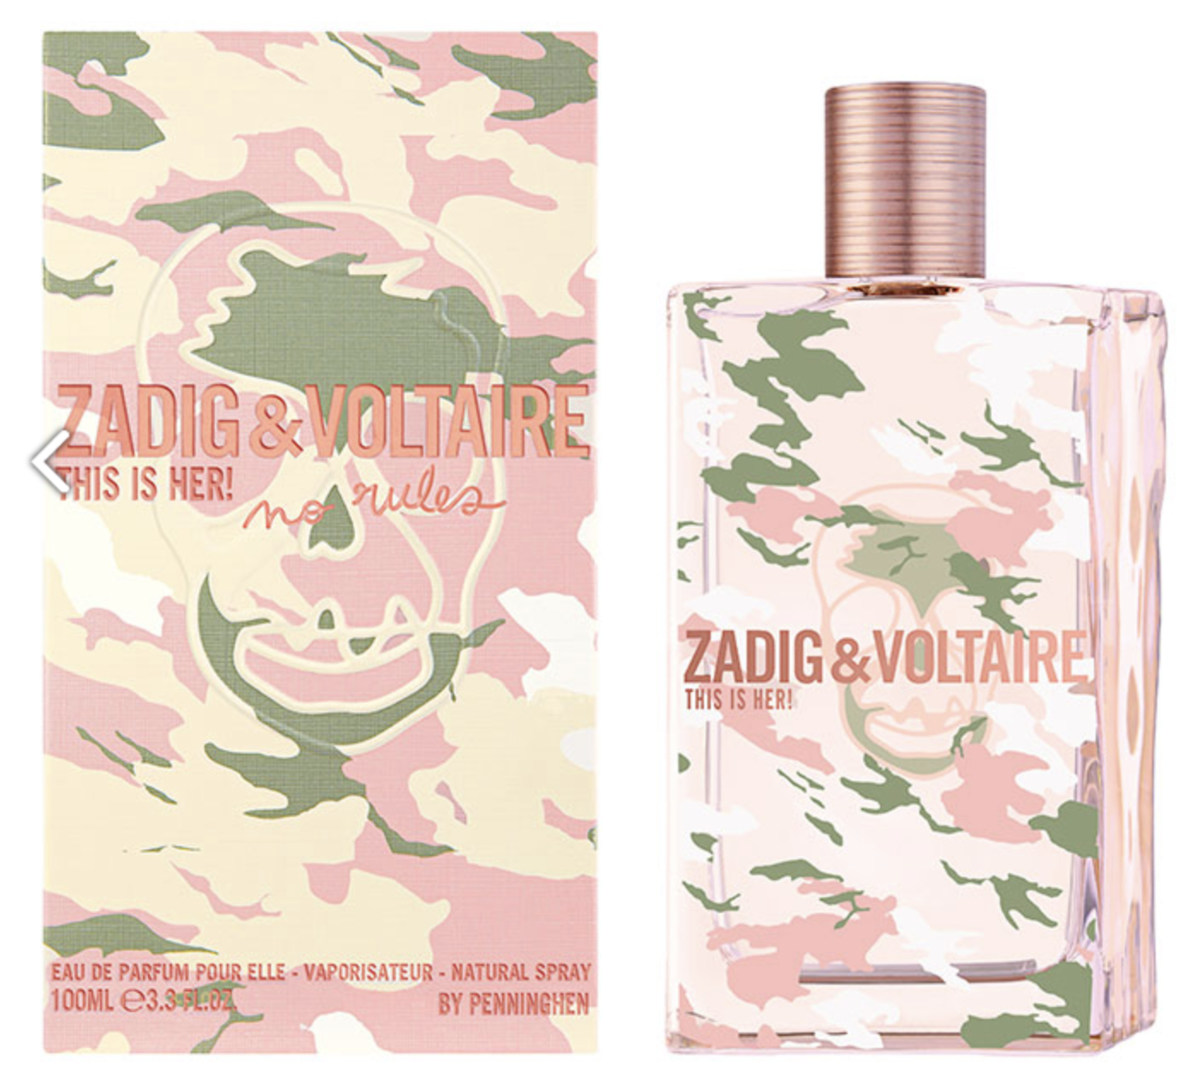 Zadig & Voltaire This is Her! Capsule Collection 2019 50ml NIŠINIAI Kvepalai Moterims EDP